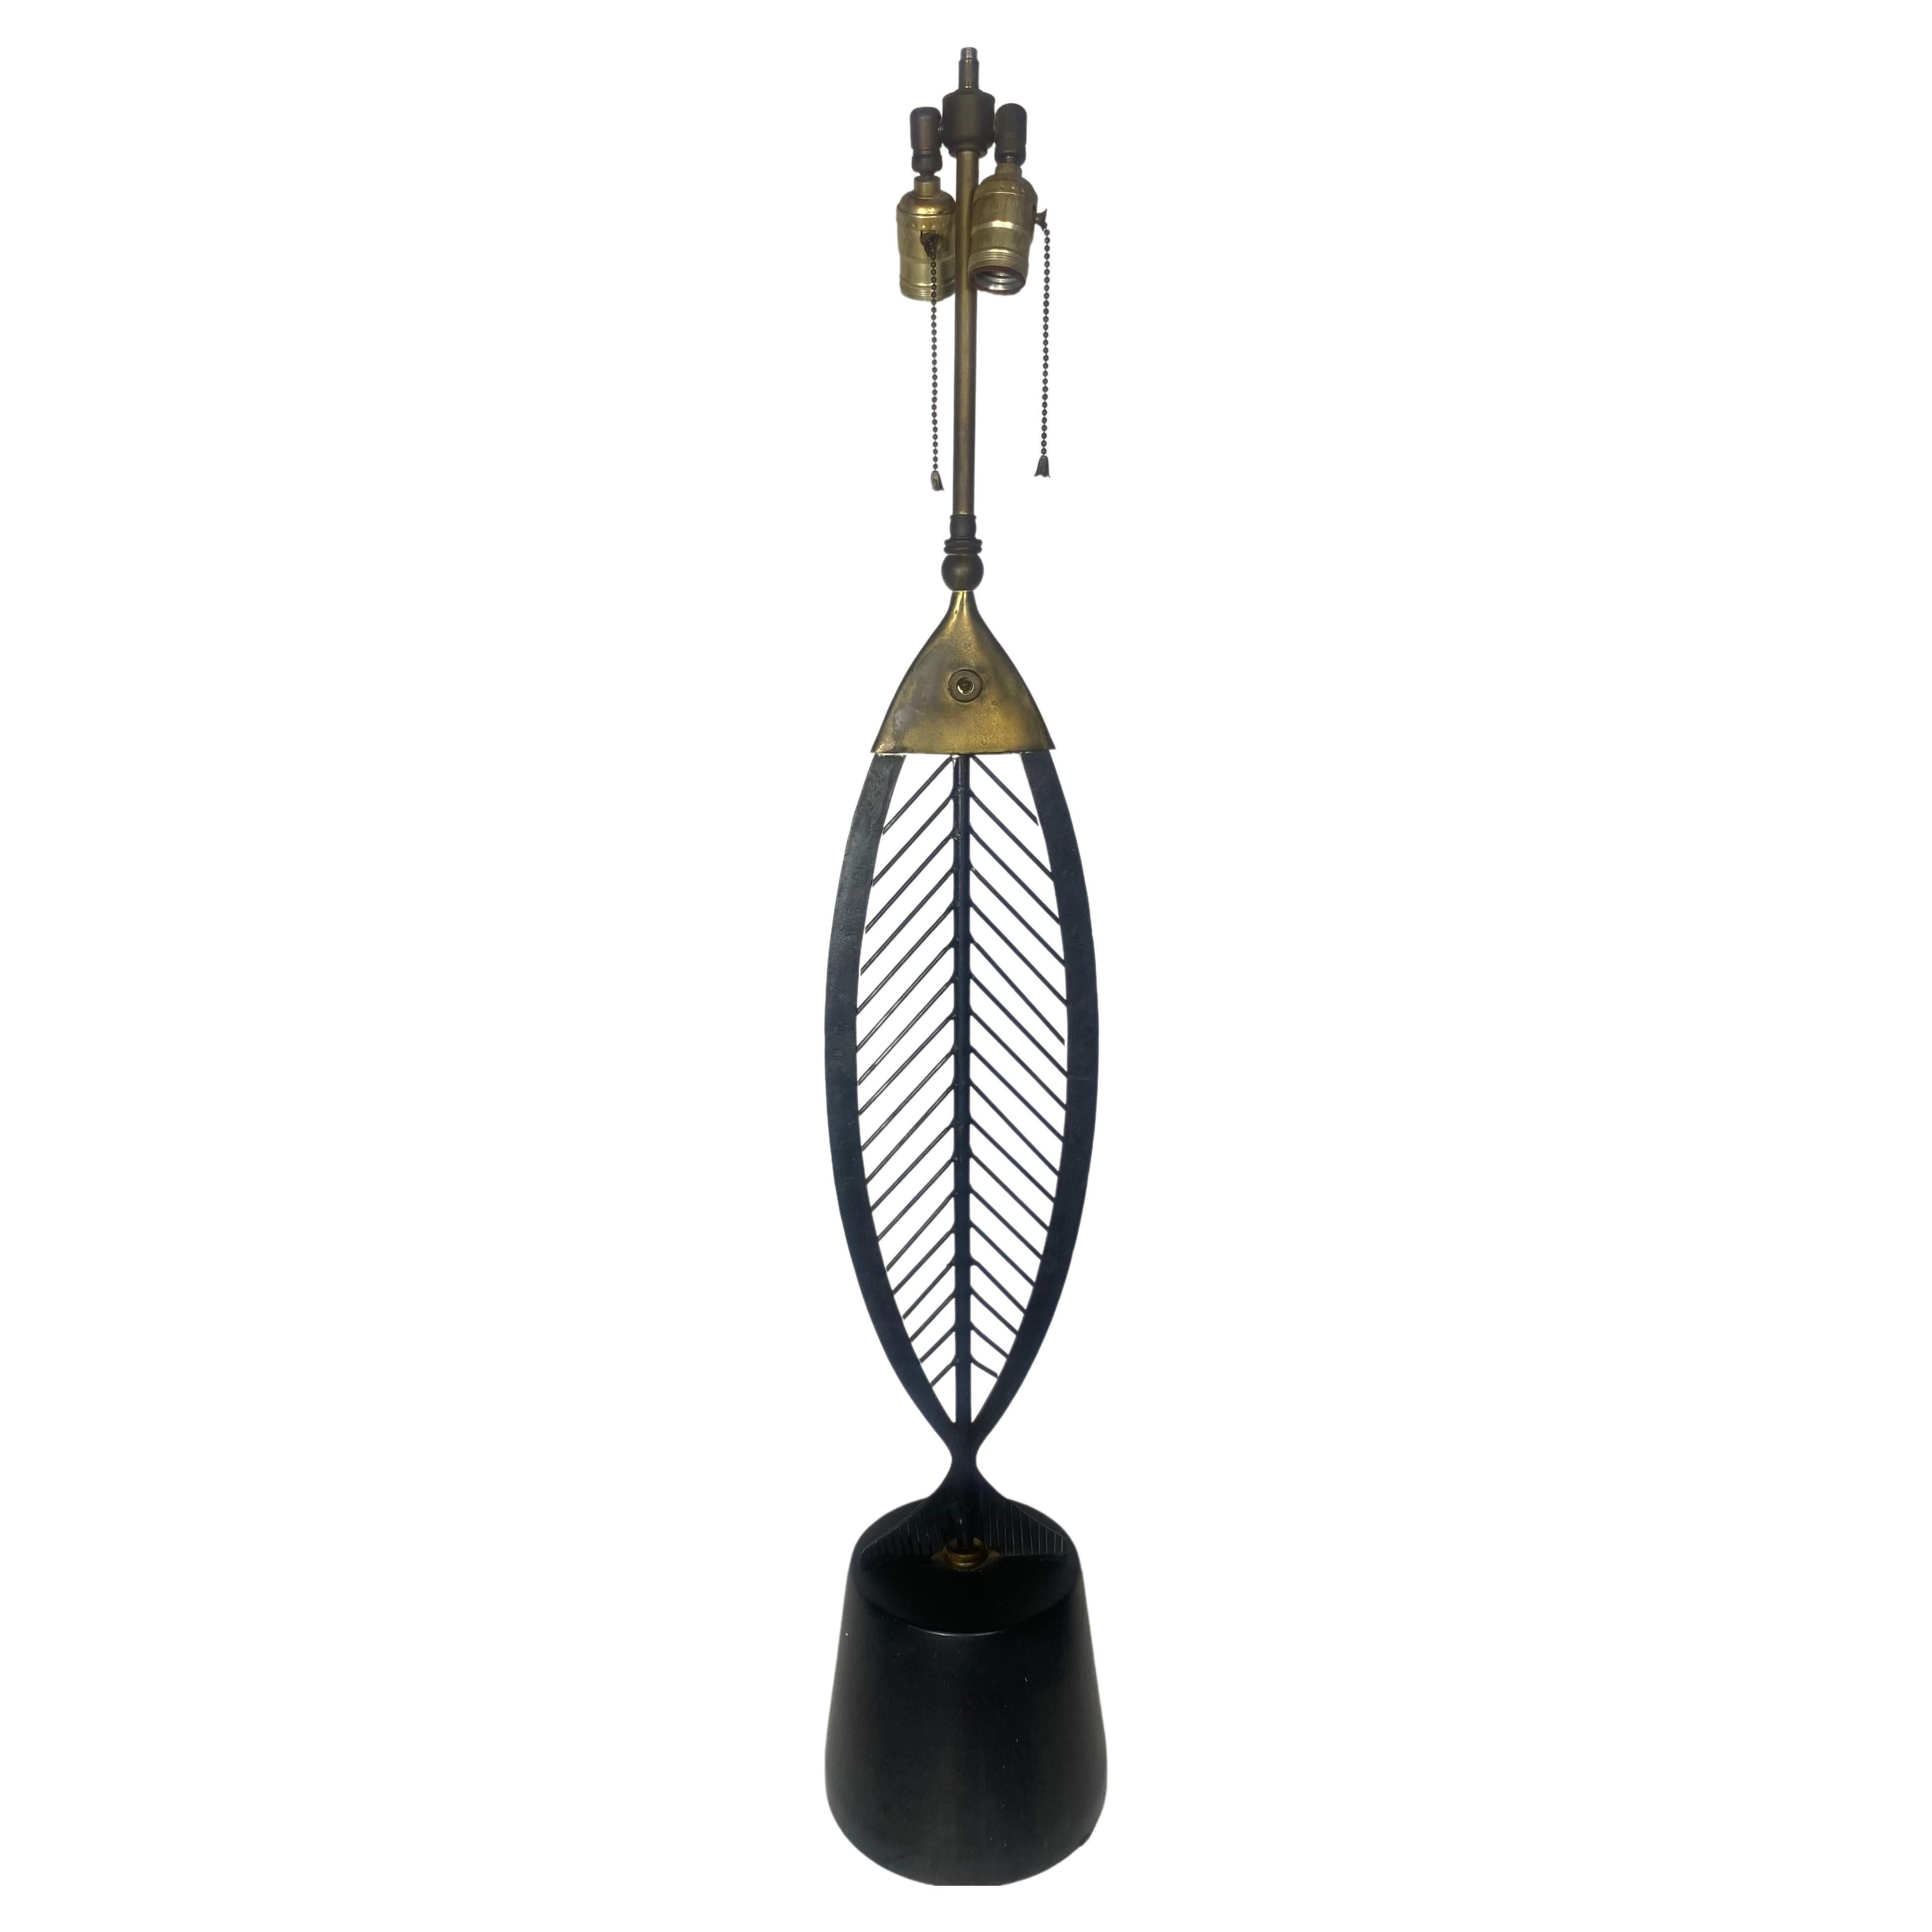 Monumental  "FISH" Table Lamp Attributed to Heifetz.. Iron and Brass, Modernist 